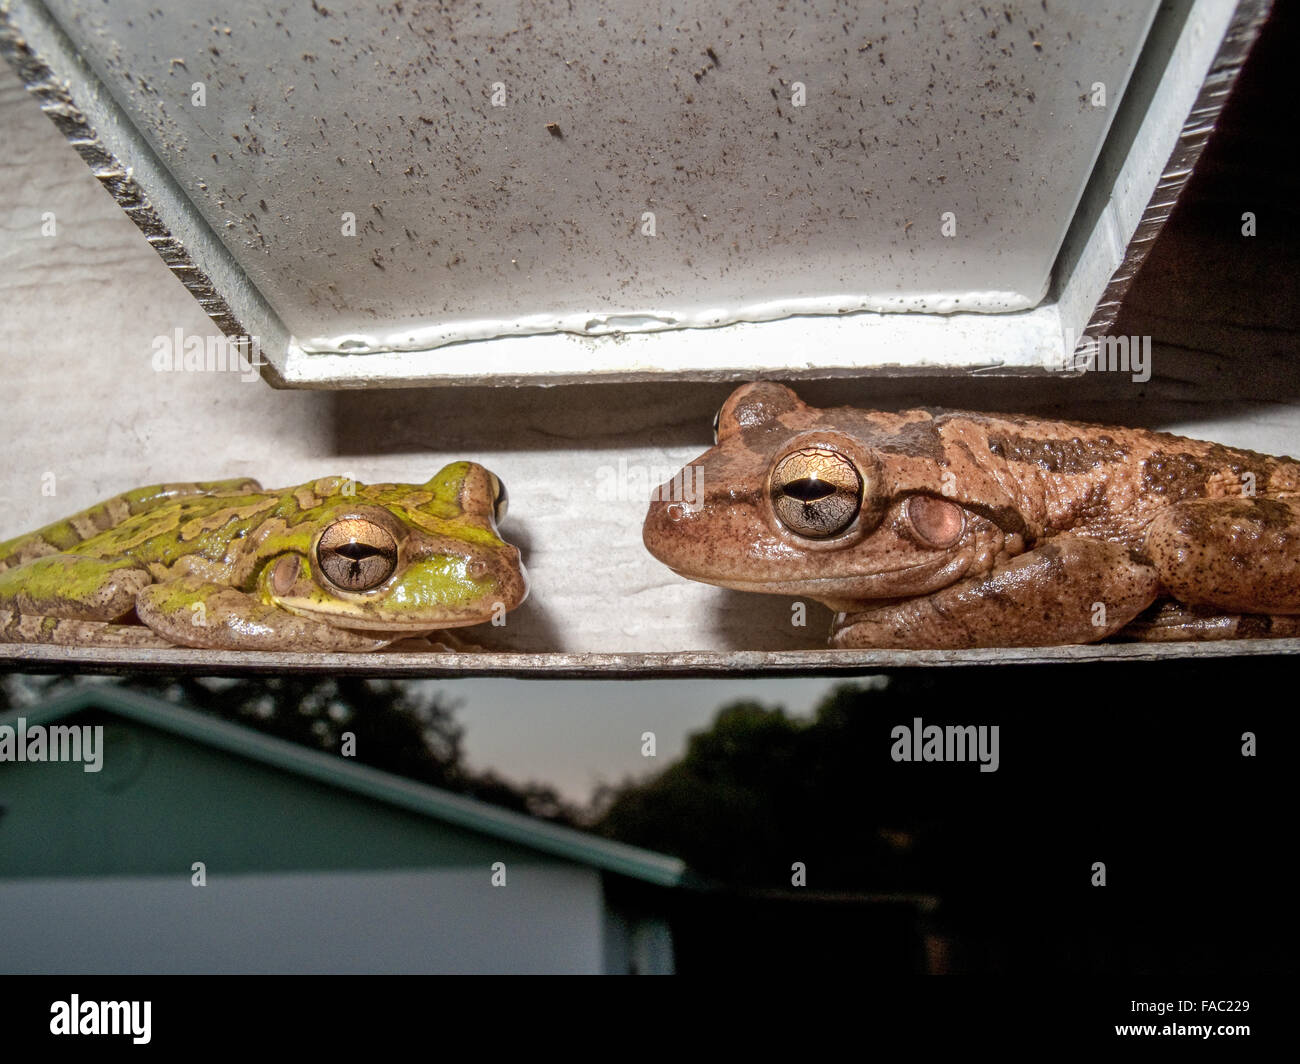 Two invasive Cuban Tree Frogs (Osteopilus septentrionalis) one brown, one green facing each other while resting under the eaves, Florida Stock Photo